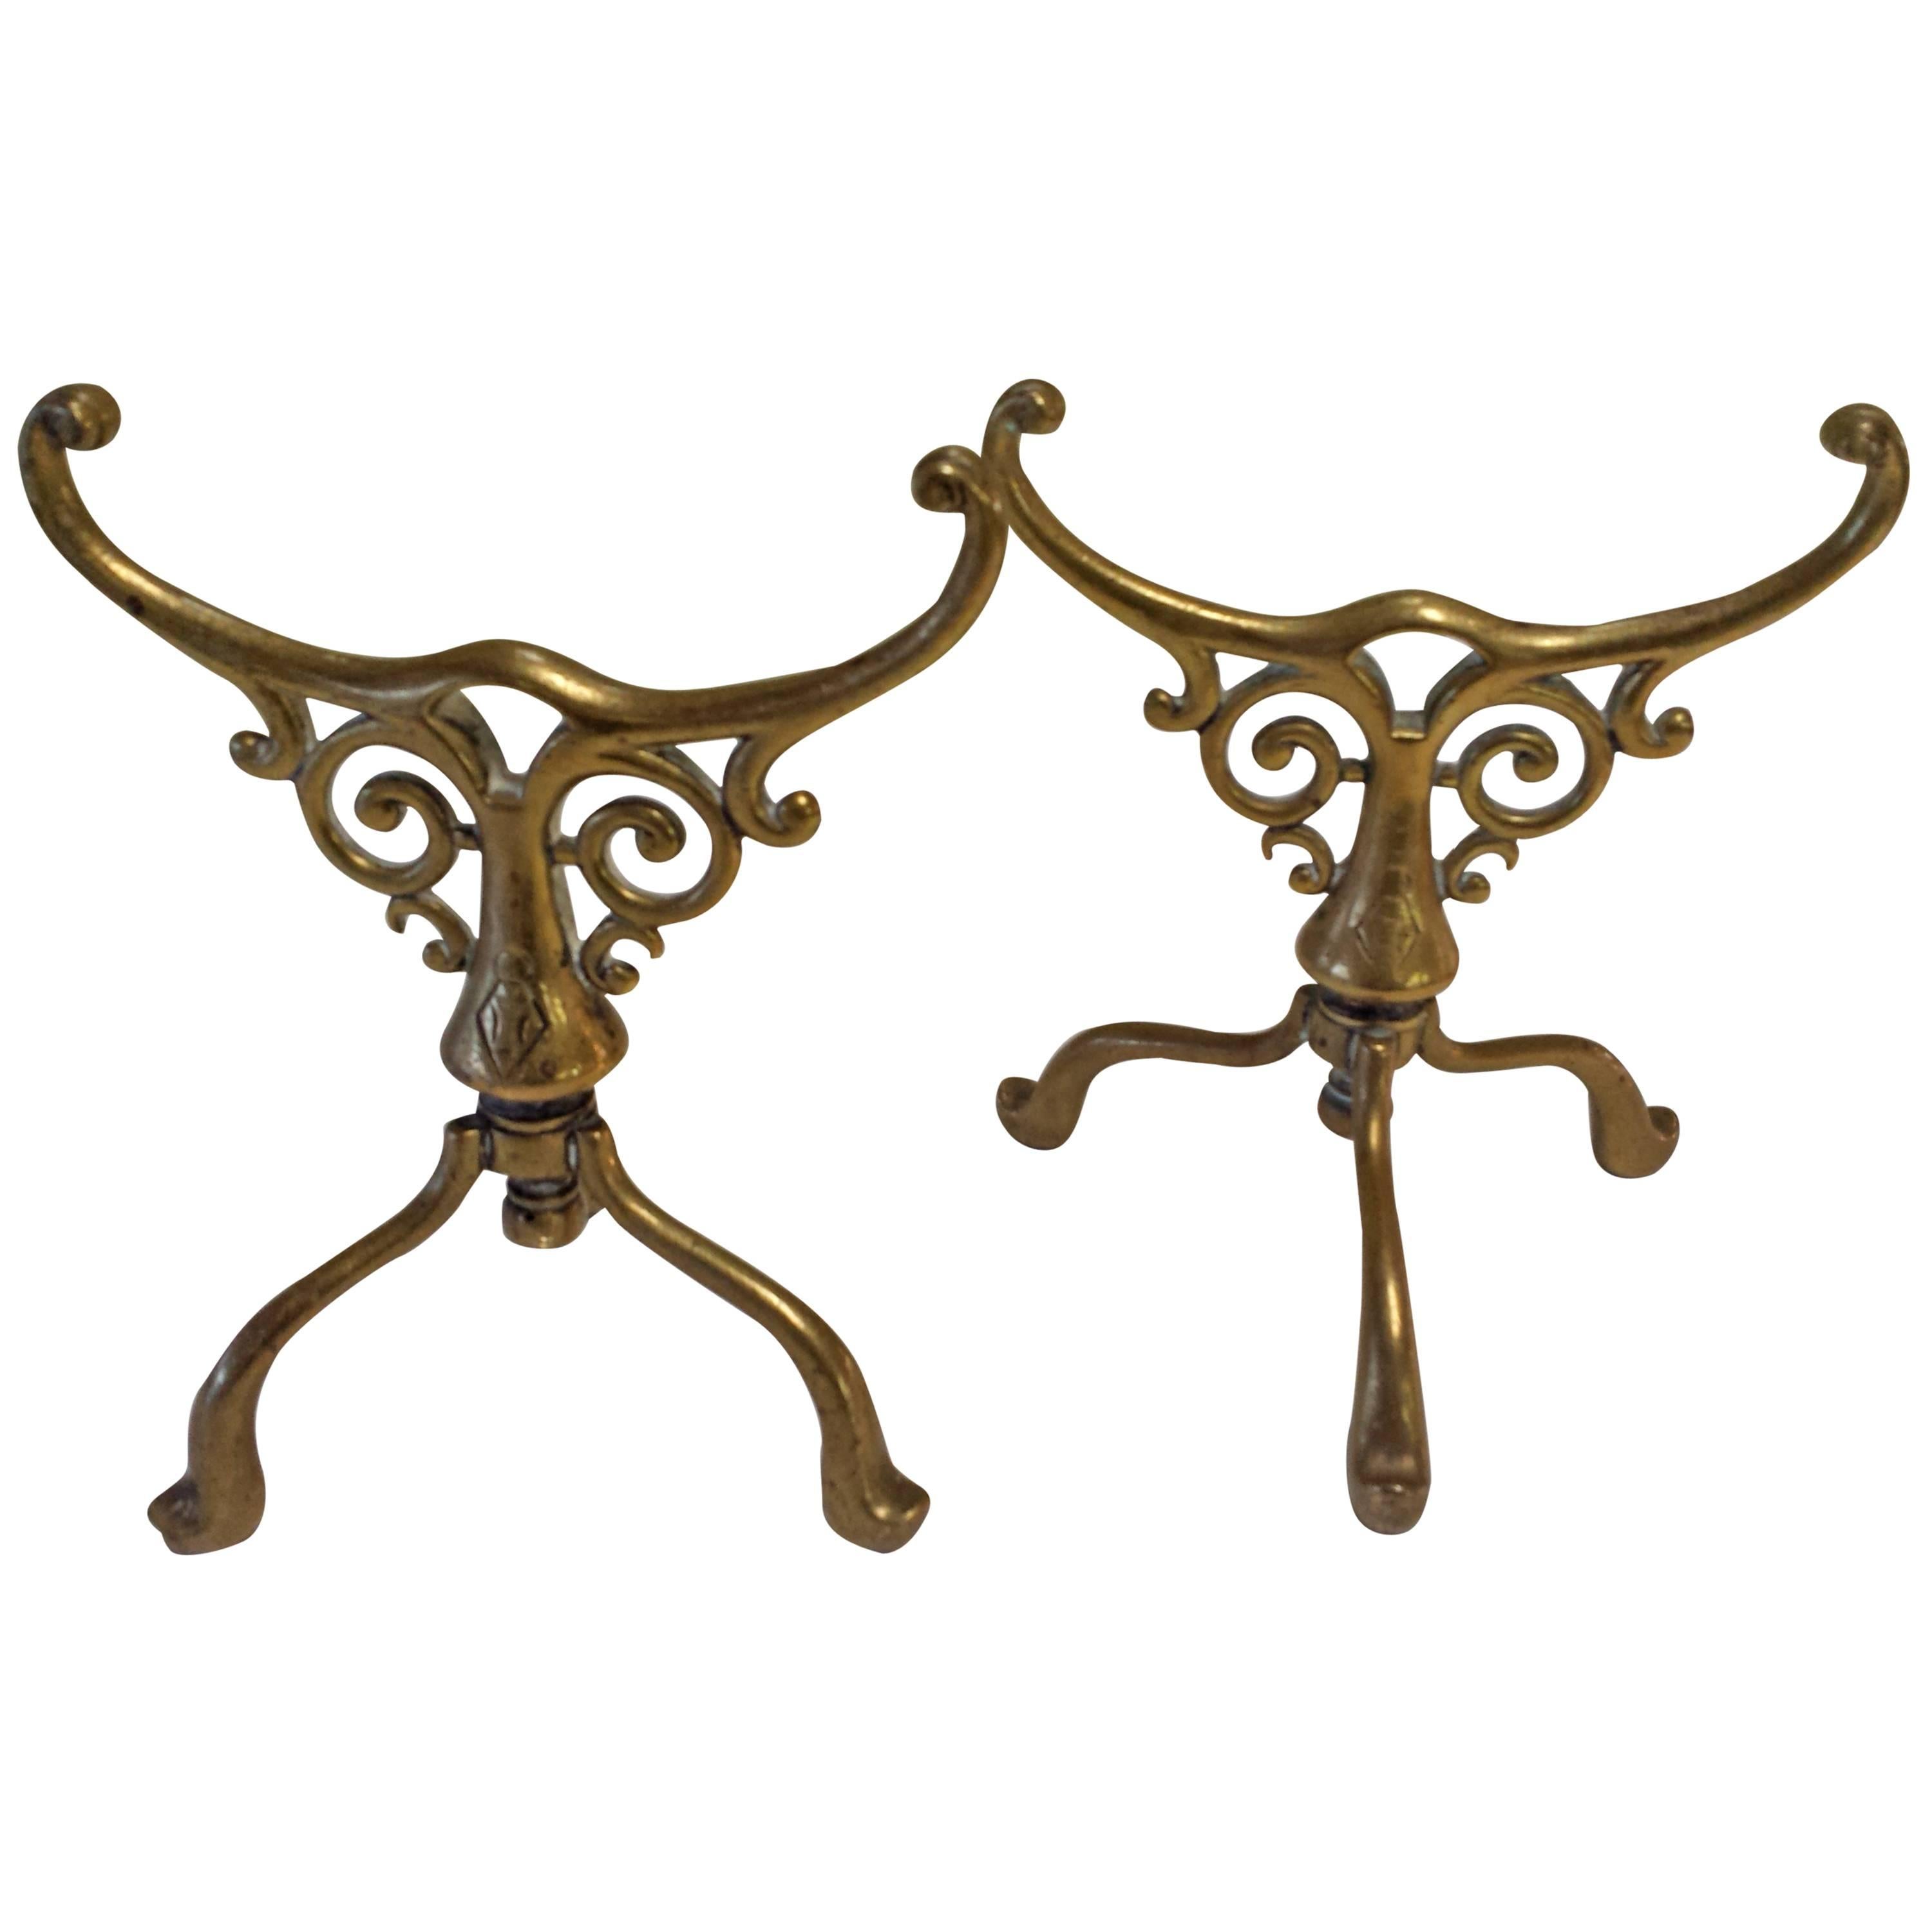 Victorian Fireplace Tool or Cooking Utensil Rests, British Registration Marks  